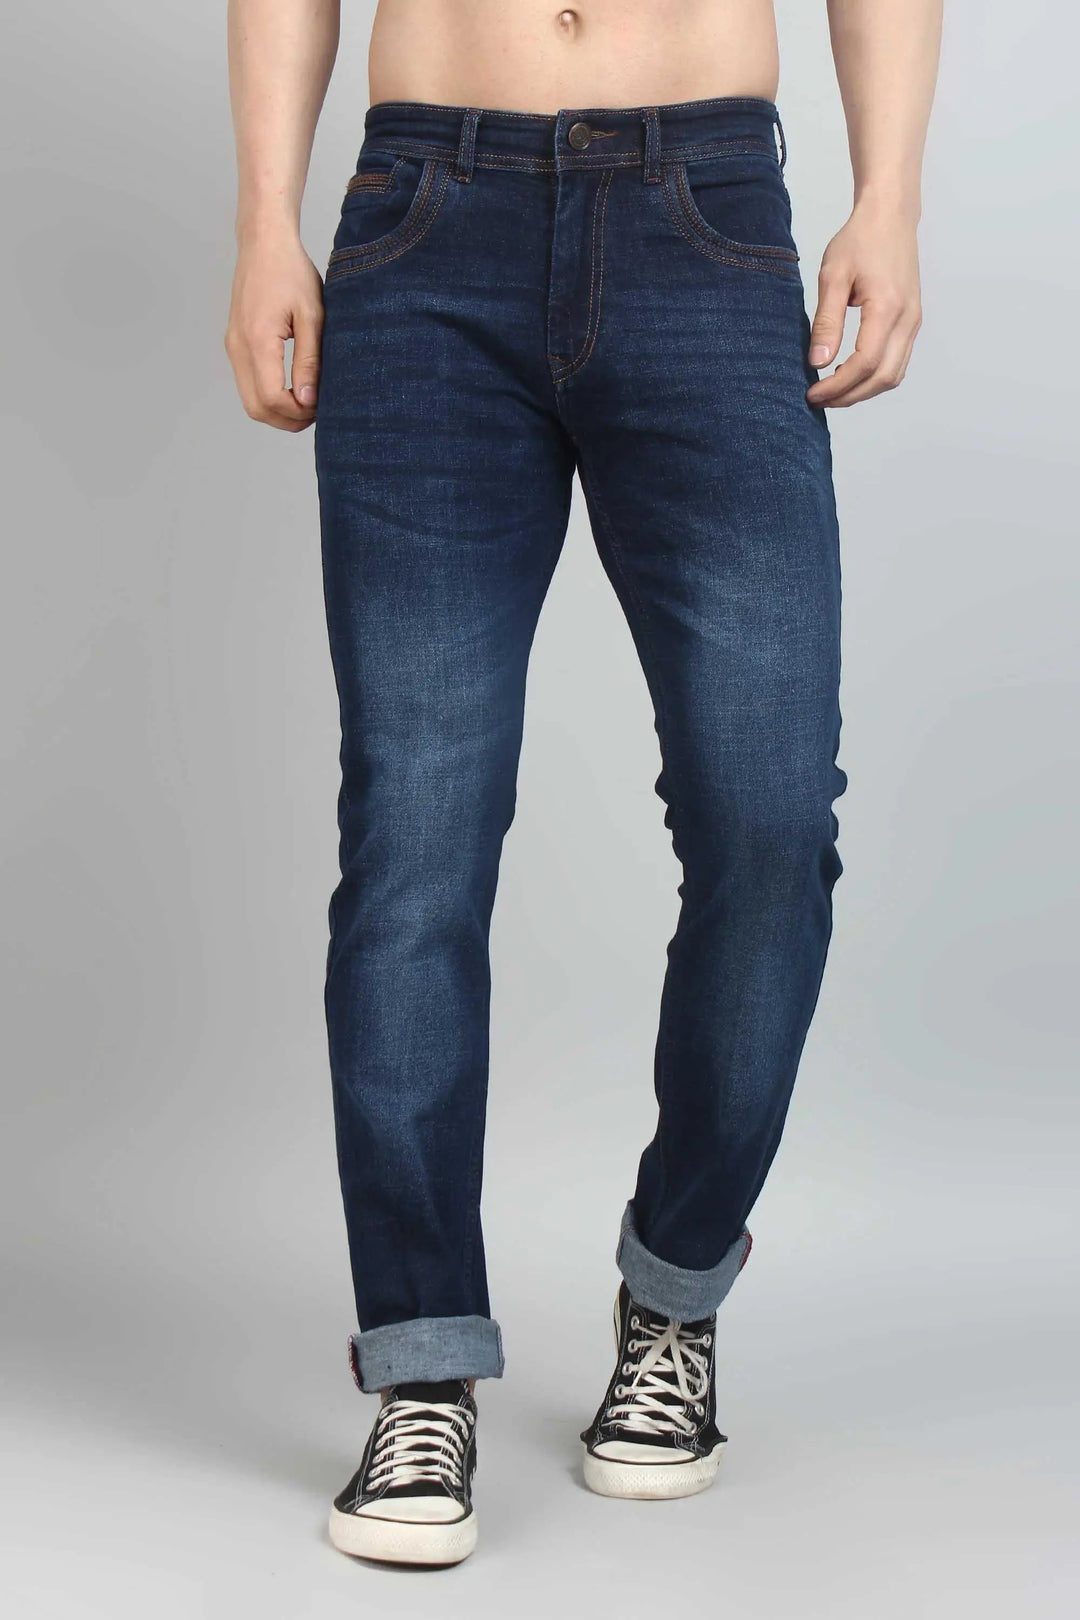 The Ankle-fit denim jeans are made of high-quality premium fabric which gives you a very premium look and comfort in wear if you are looking comfort with quality then this denim jeans is made for you